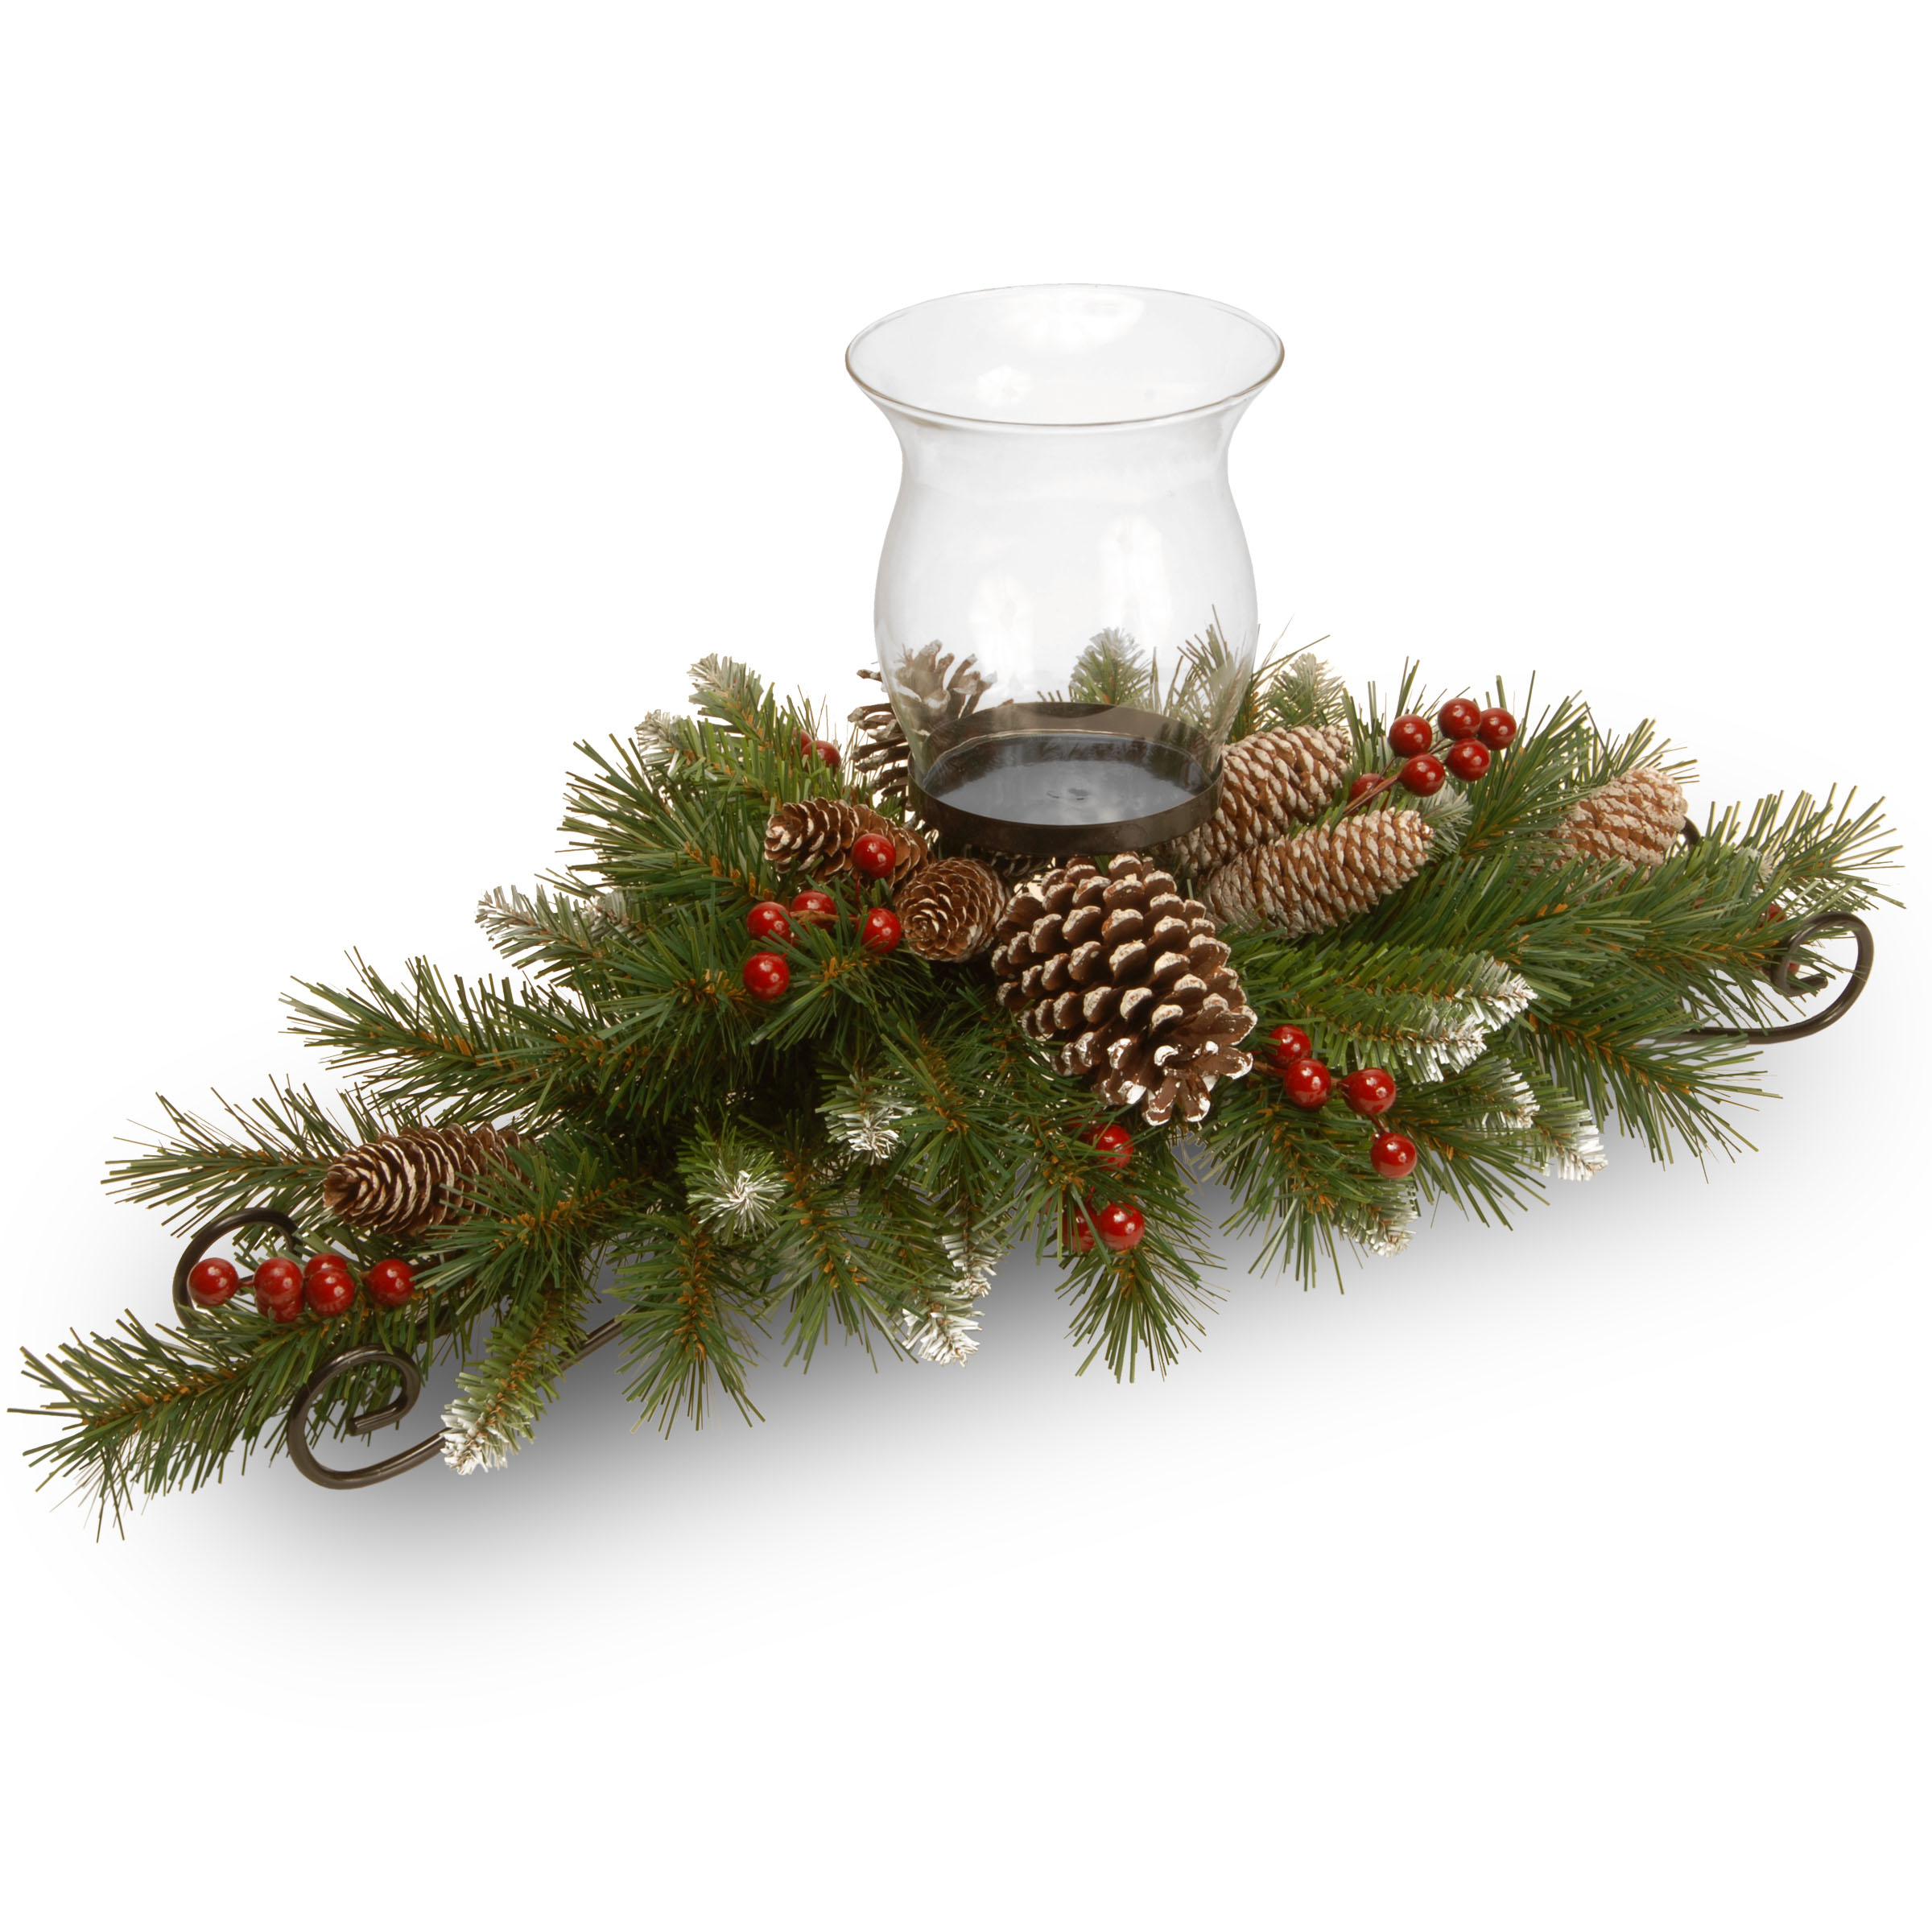 30 Inch Frosted Berry Glass Hurricane Centerpiece: Candle Holder